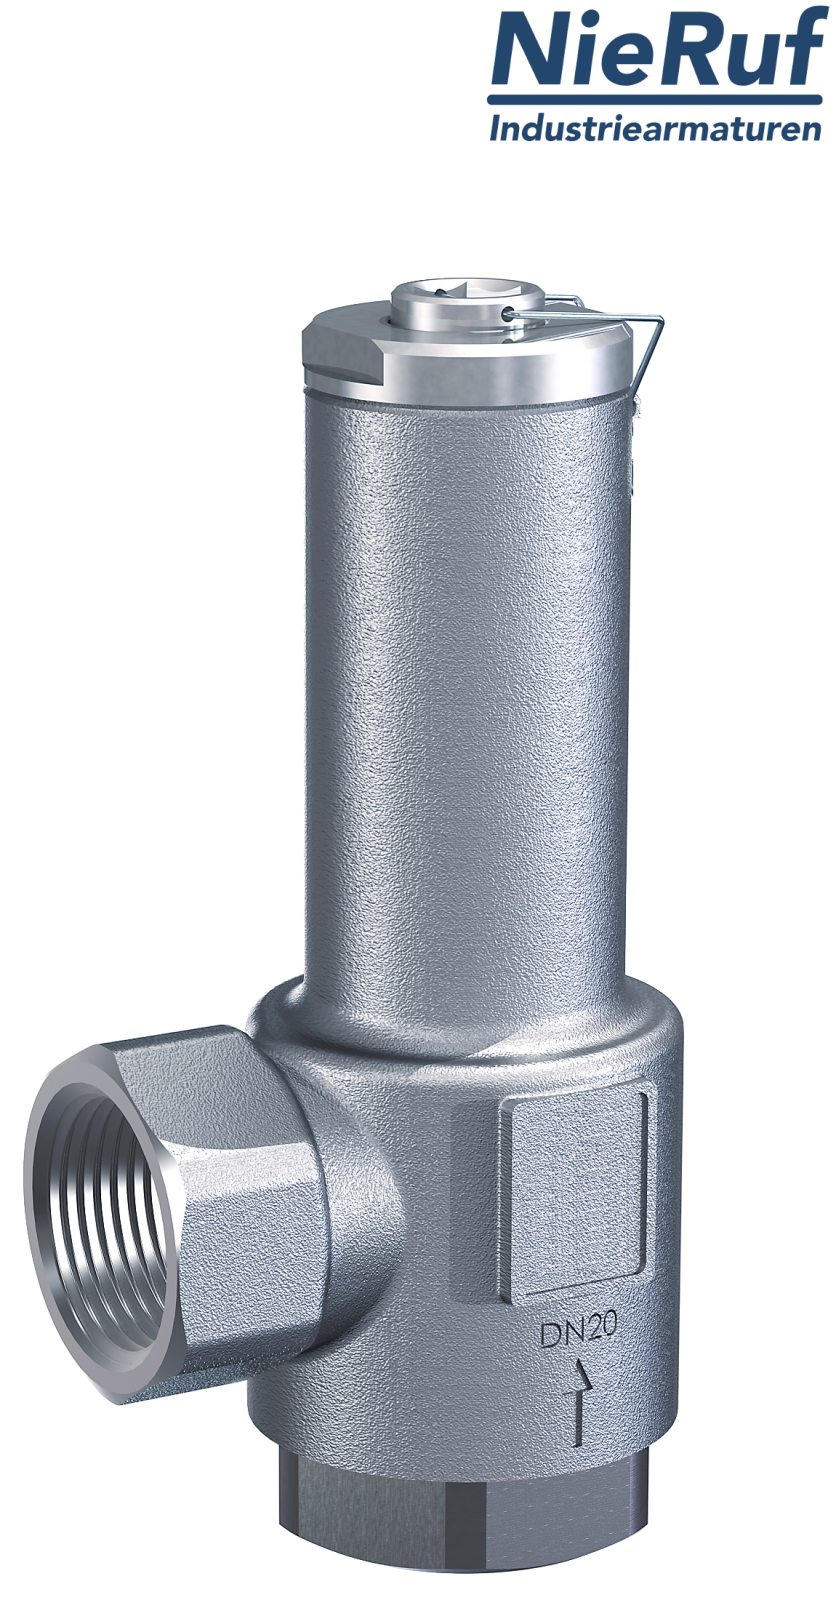 angle-type overflow valve 1/2" inch fm UV04 stainless steel AISI 316L 0,5 - 2,5 bar